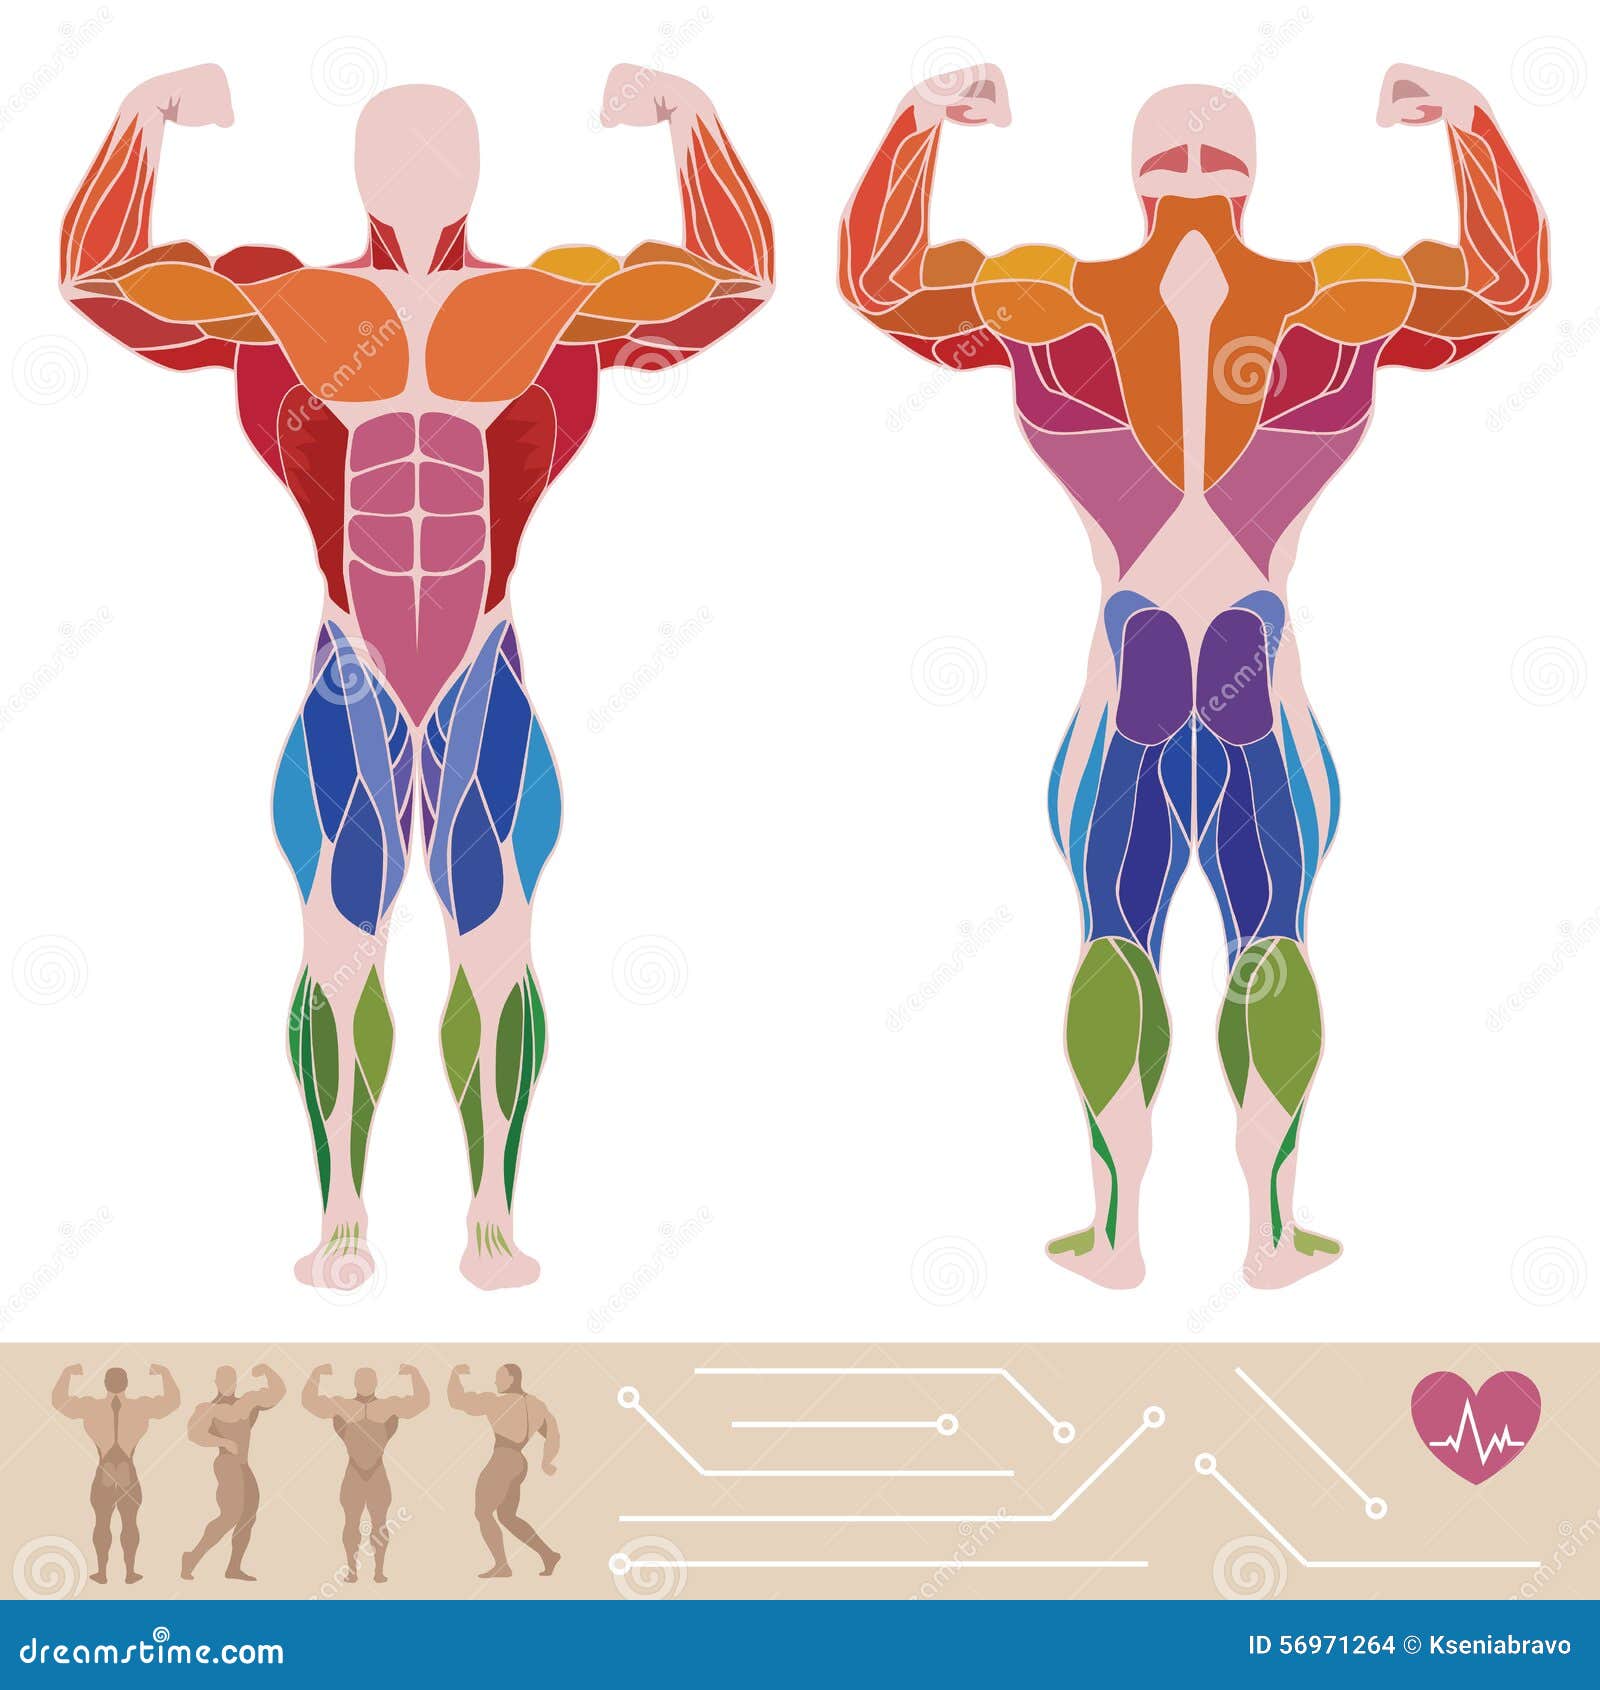 the human muscular system, anatomy, posterior and anterior view,